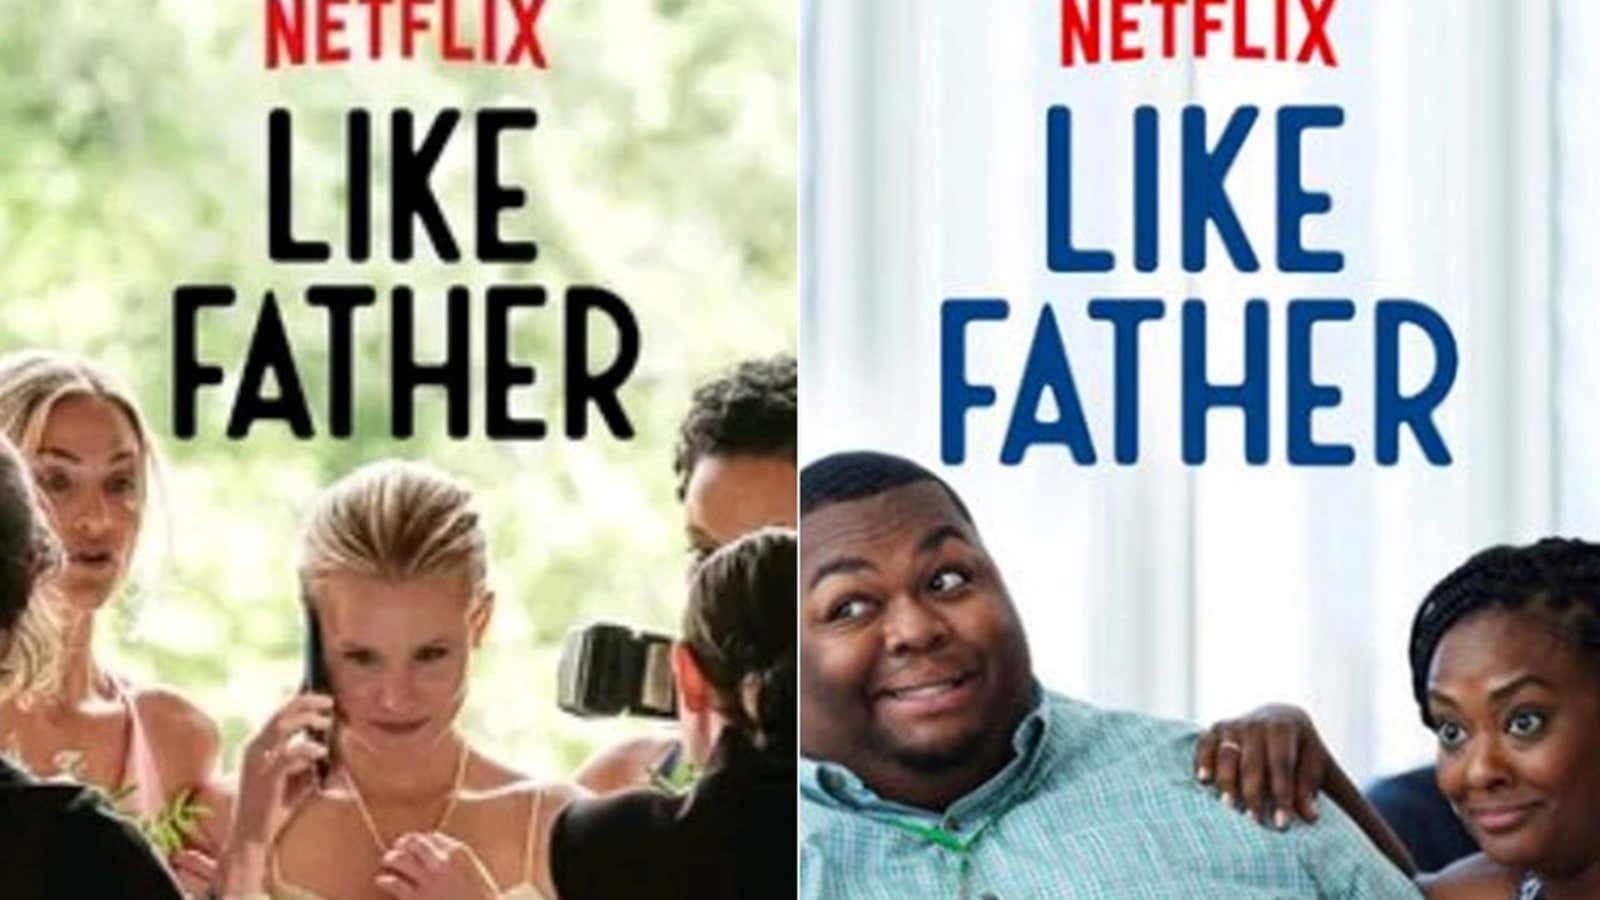 Why are black Netflix viewers seeing ads showing minor black characters from movies?